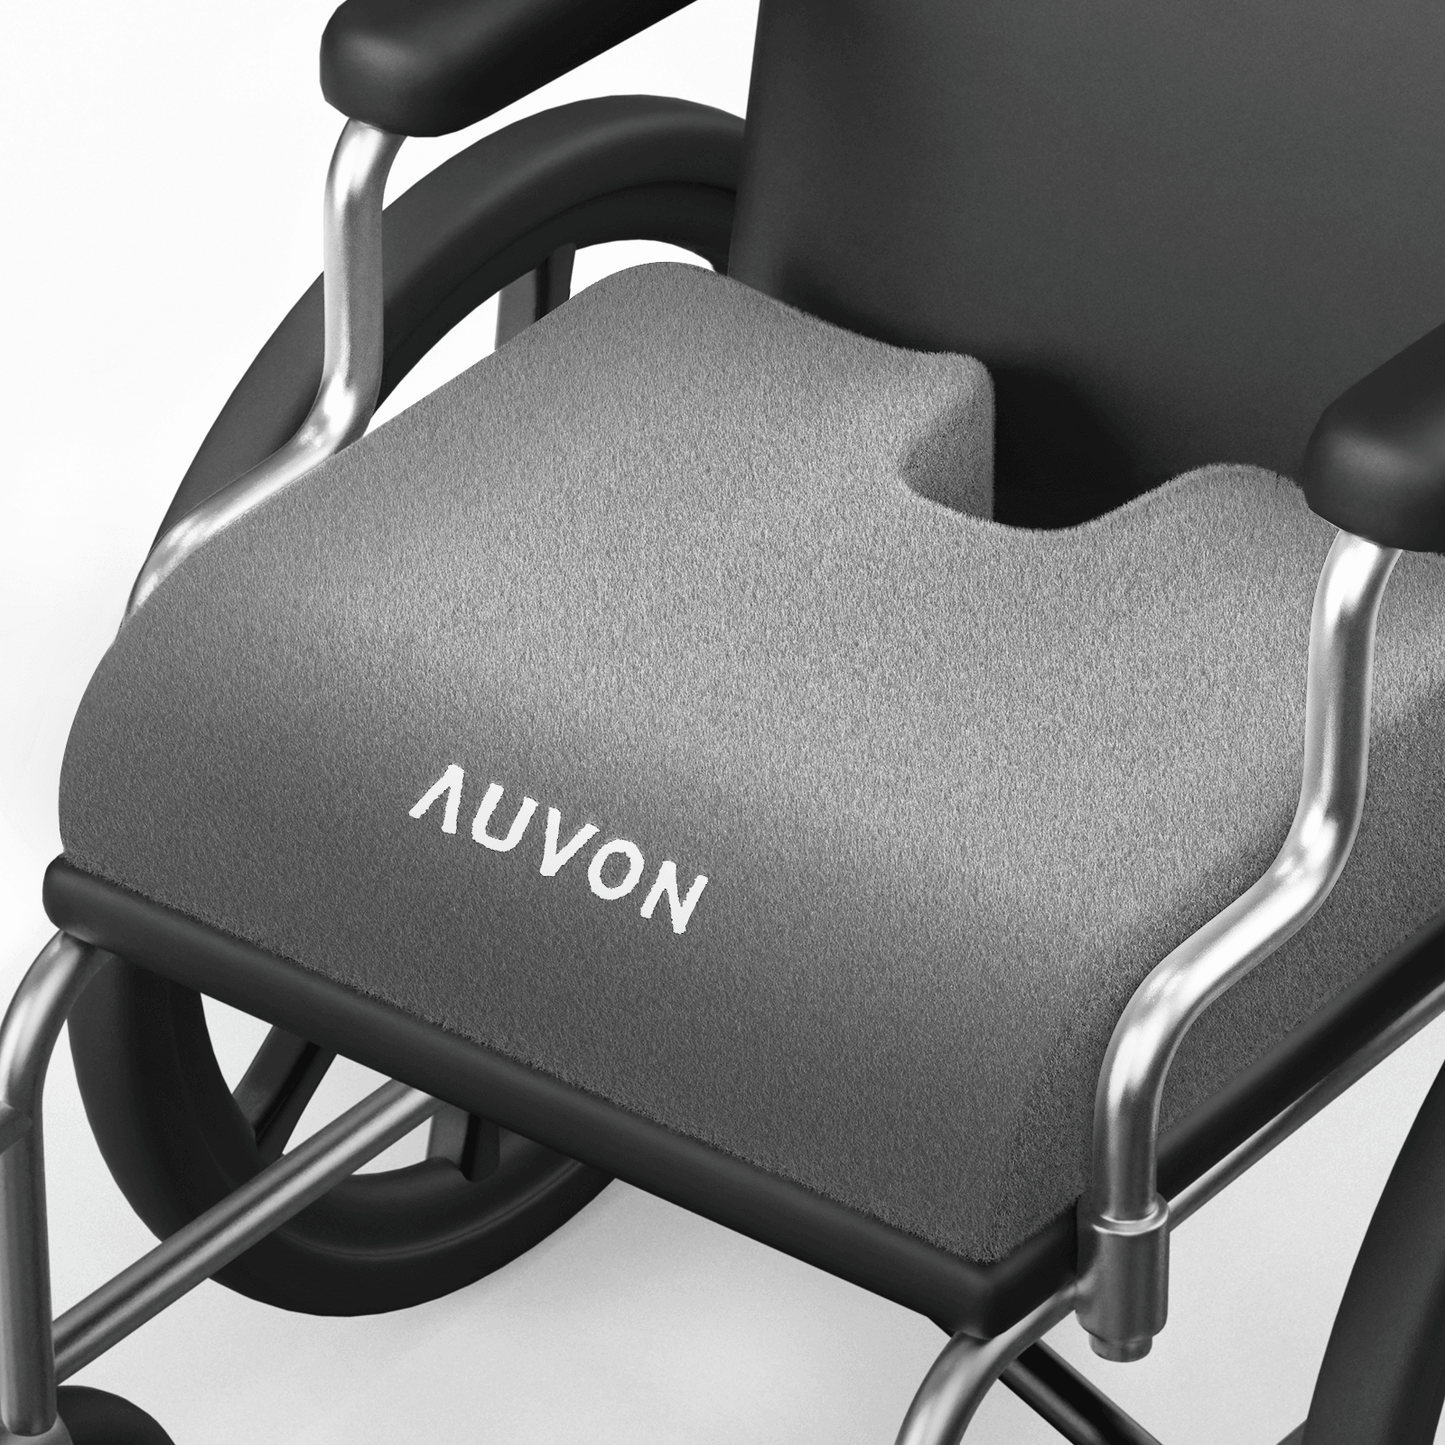 https://auvonhealth.com/cdn/shop/files/auvon-wheelchair-seat-cushions-18-x16-x3-for-sciatica-back-coccyx-pressure-sore-and-ulcer-pain-relief-memory-foam-pressure-relief-cushion-with-removable-strap-breathable-and-waterproo_78f0188f-73ca-4e27-a572-e4977405e1fa.png?v=1686019893&width=1445